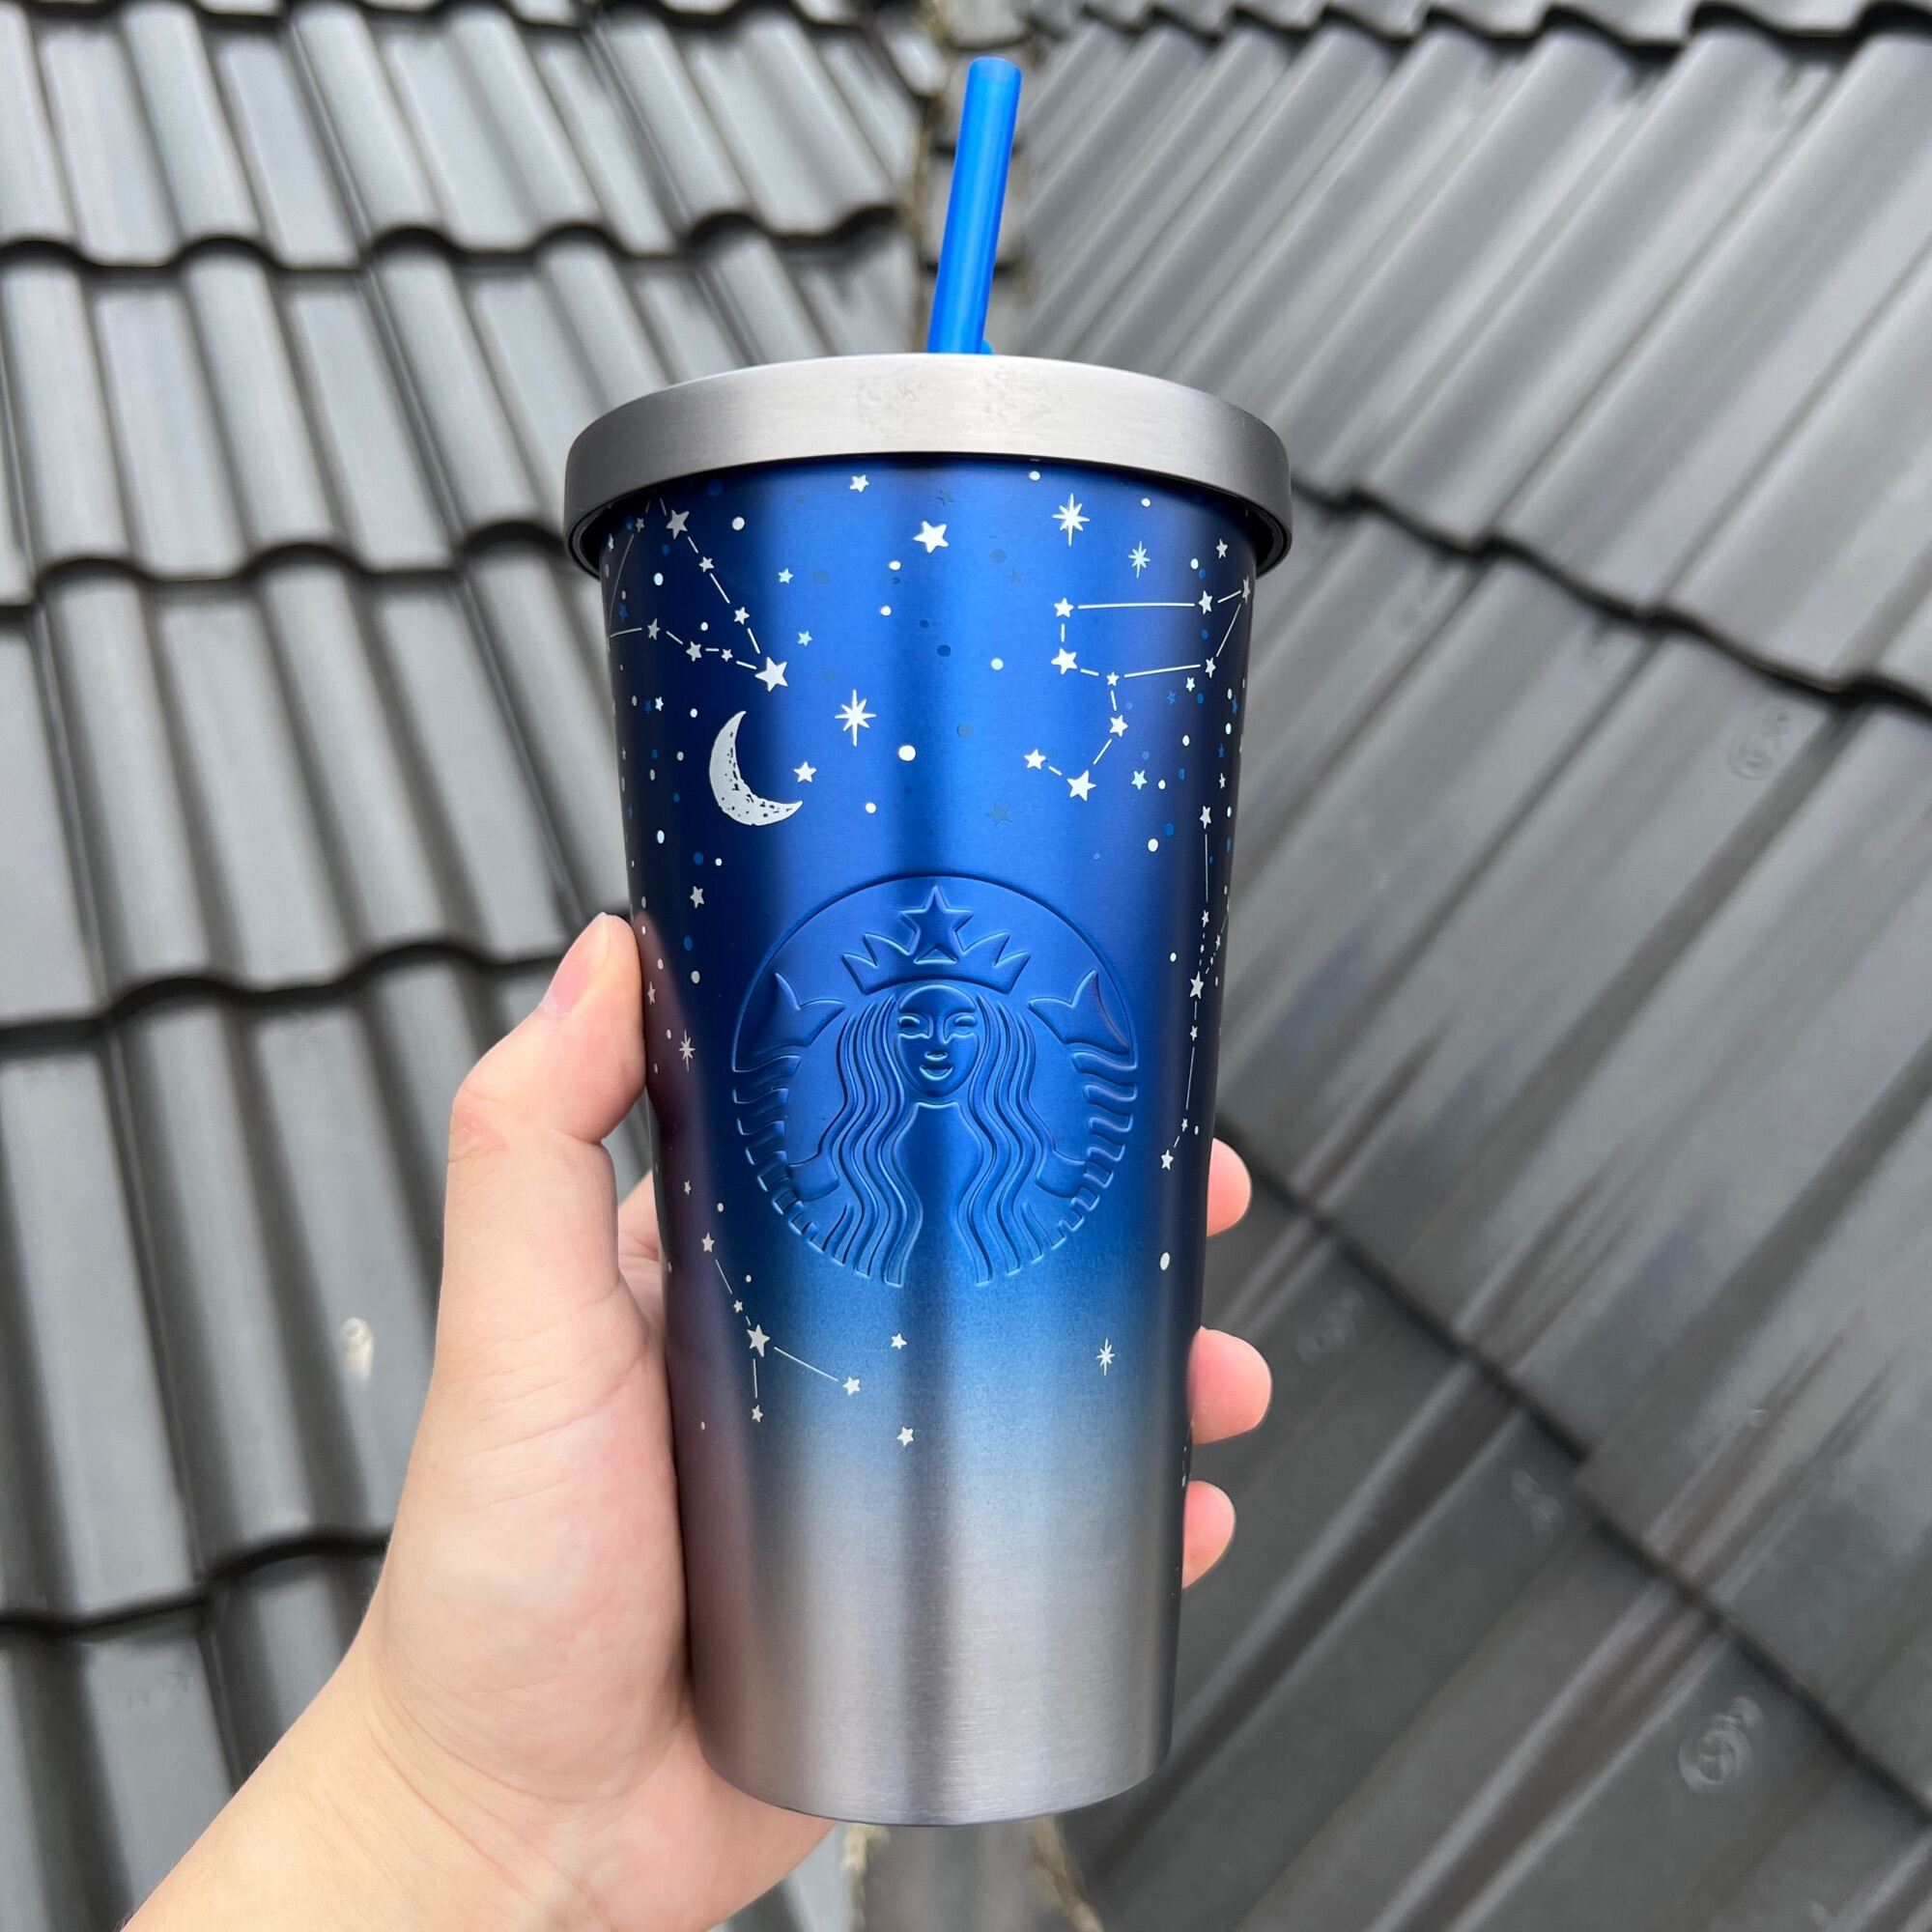 [STARBUCKS KOREA] - LY GIỮ NHIỆT SUMMER 2021 SS MILKY WAY COLD CUP 20oz